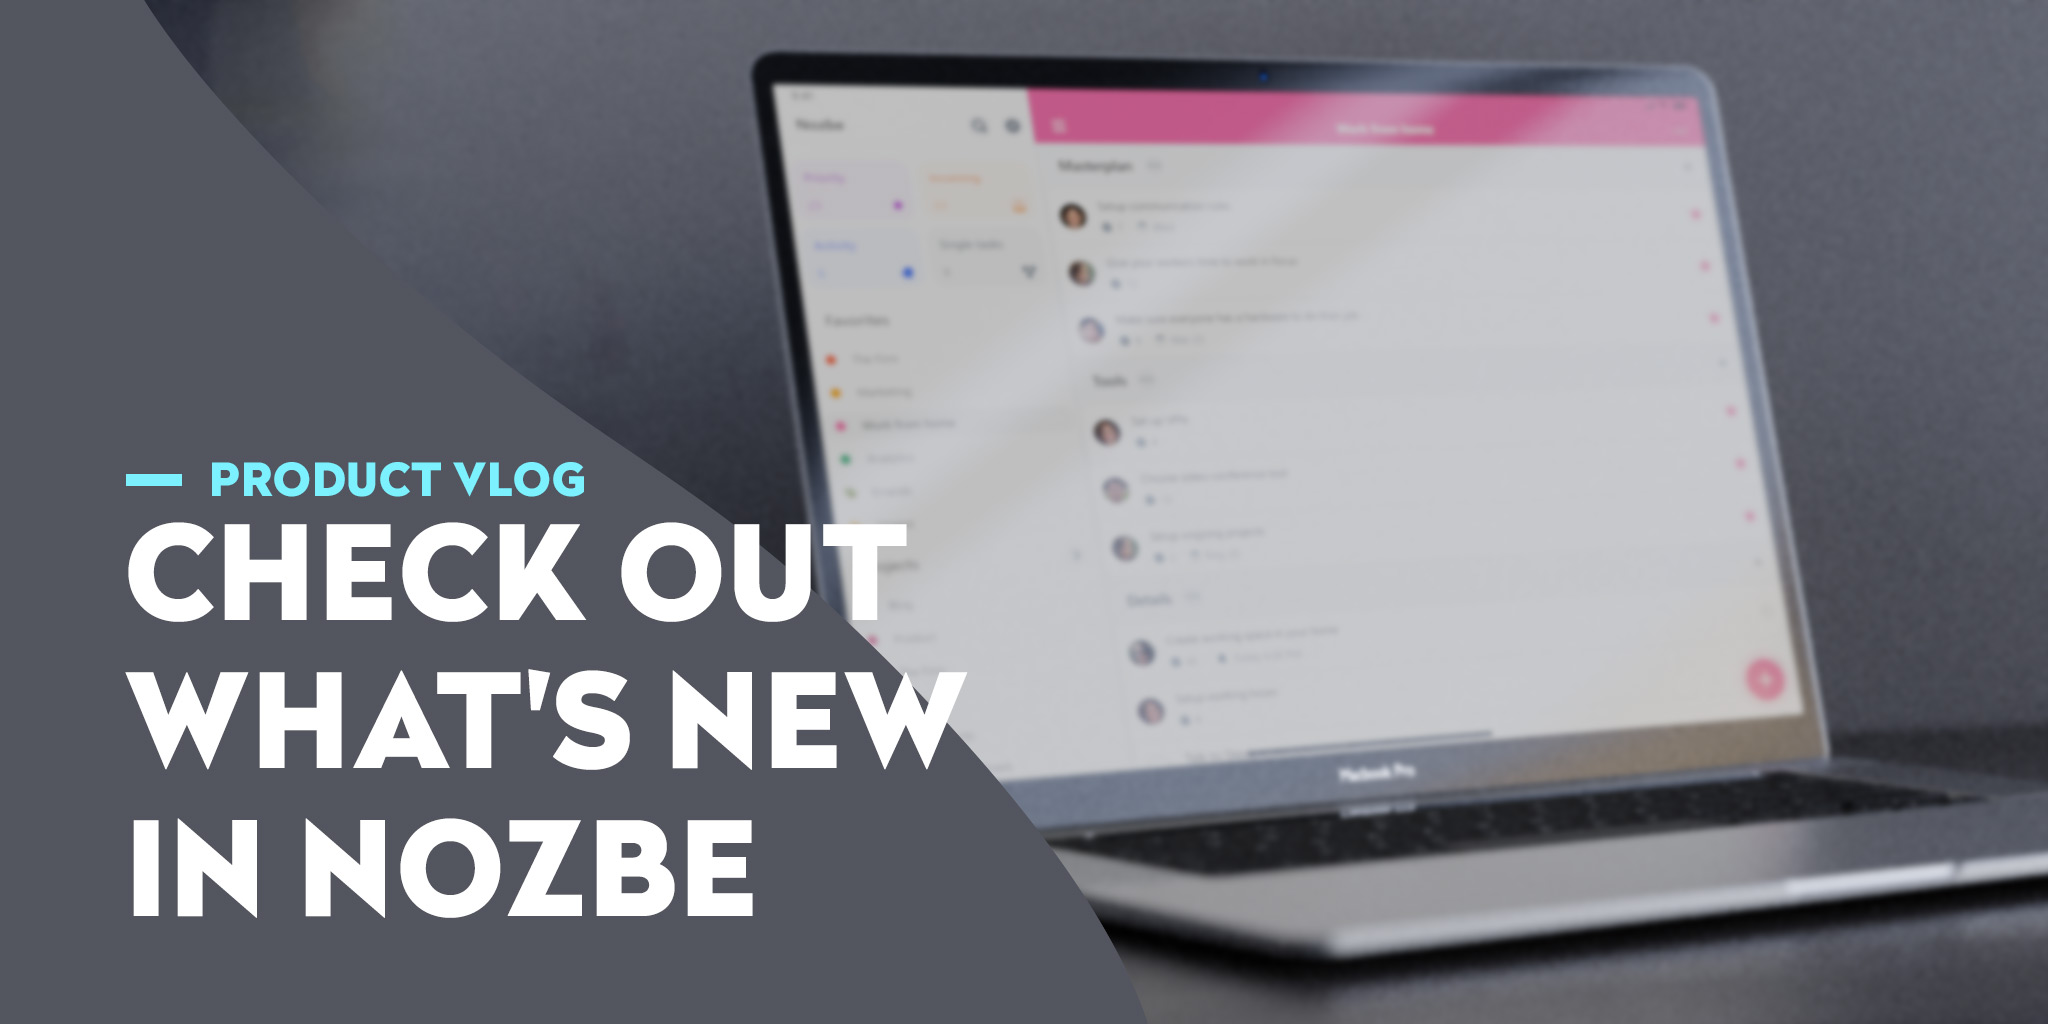 Nozbe News Vlog: Improved Sections, Comments Formatting